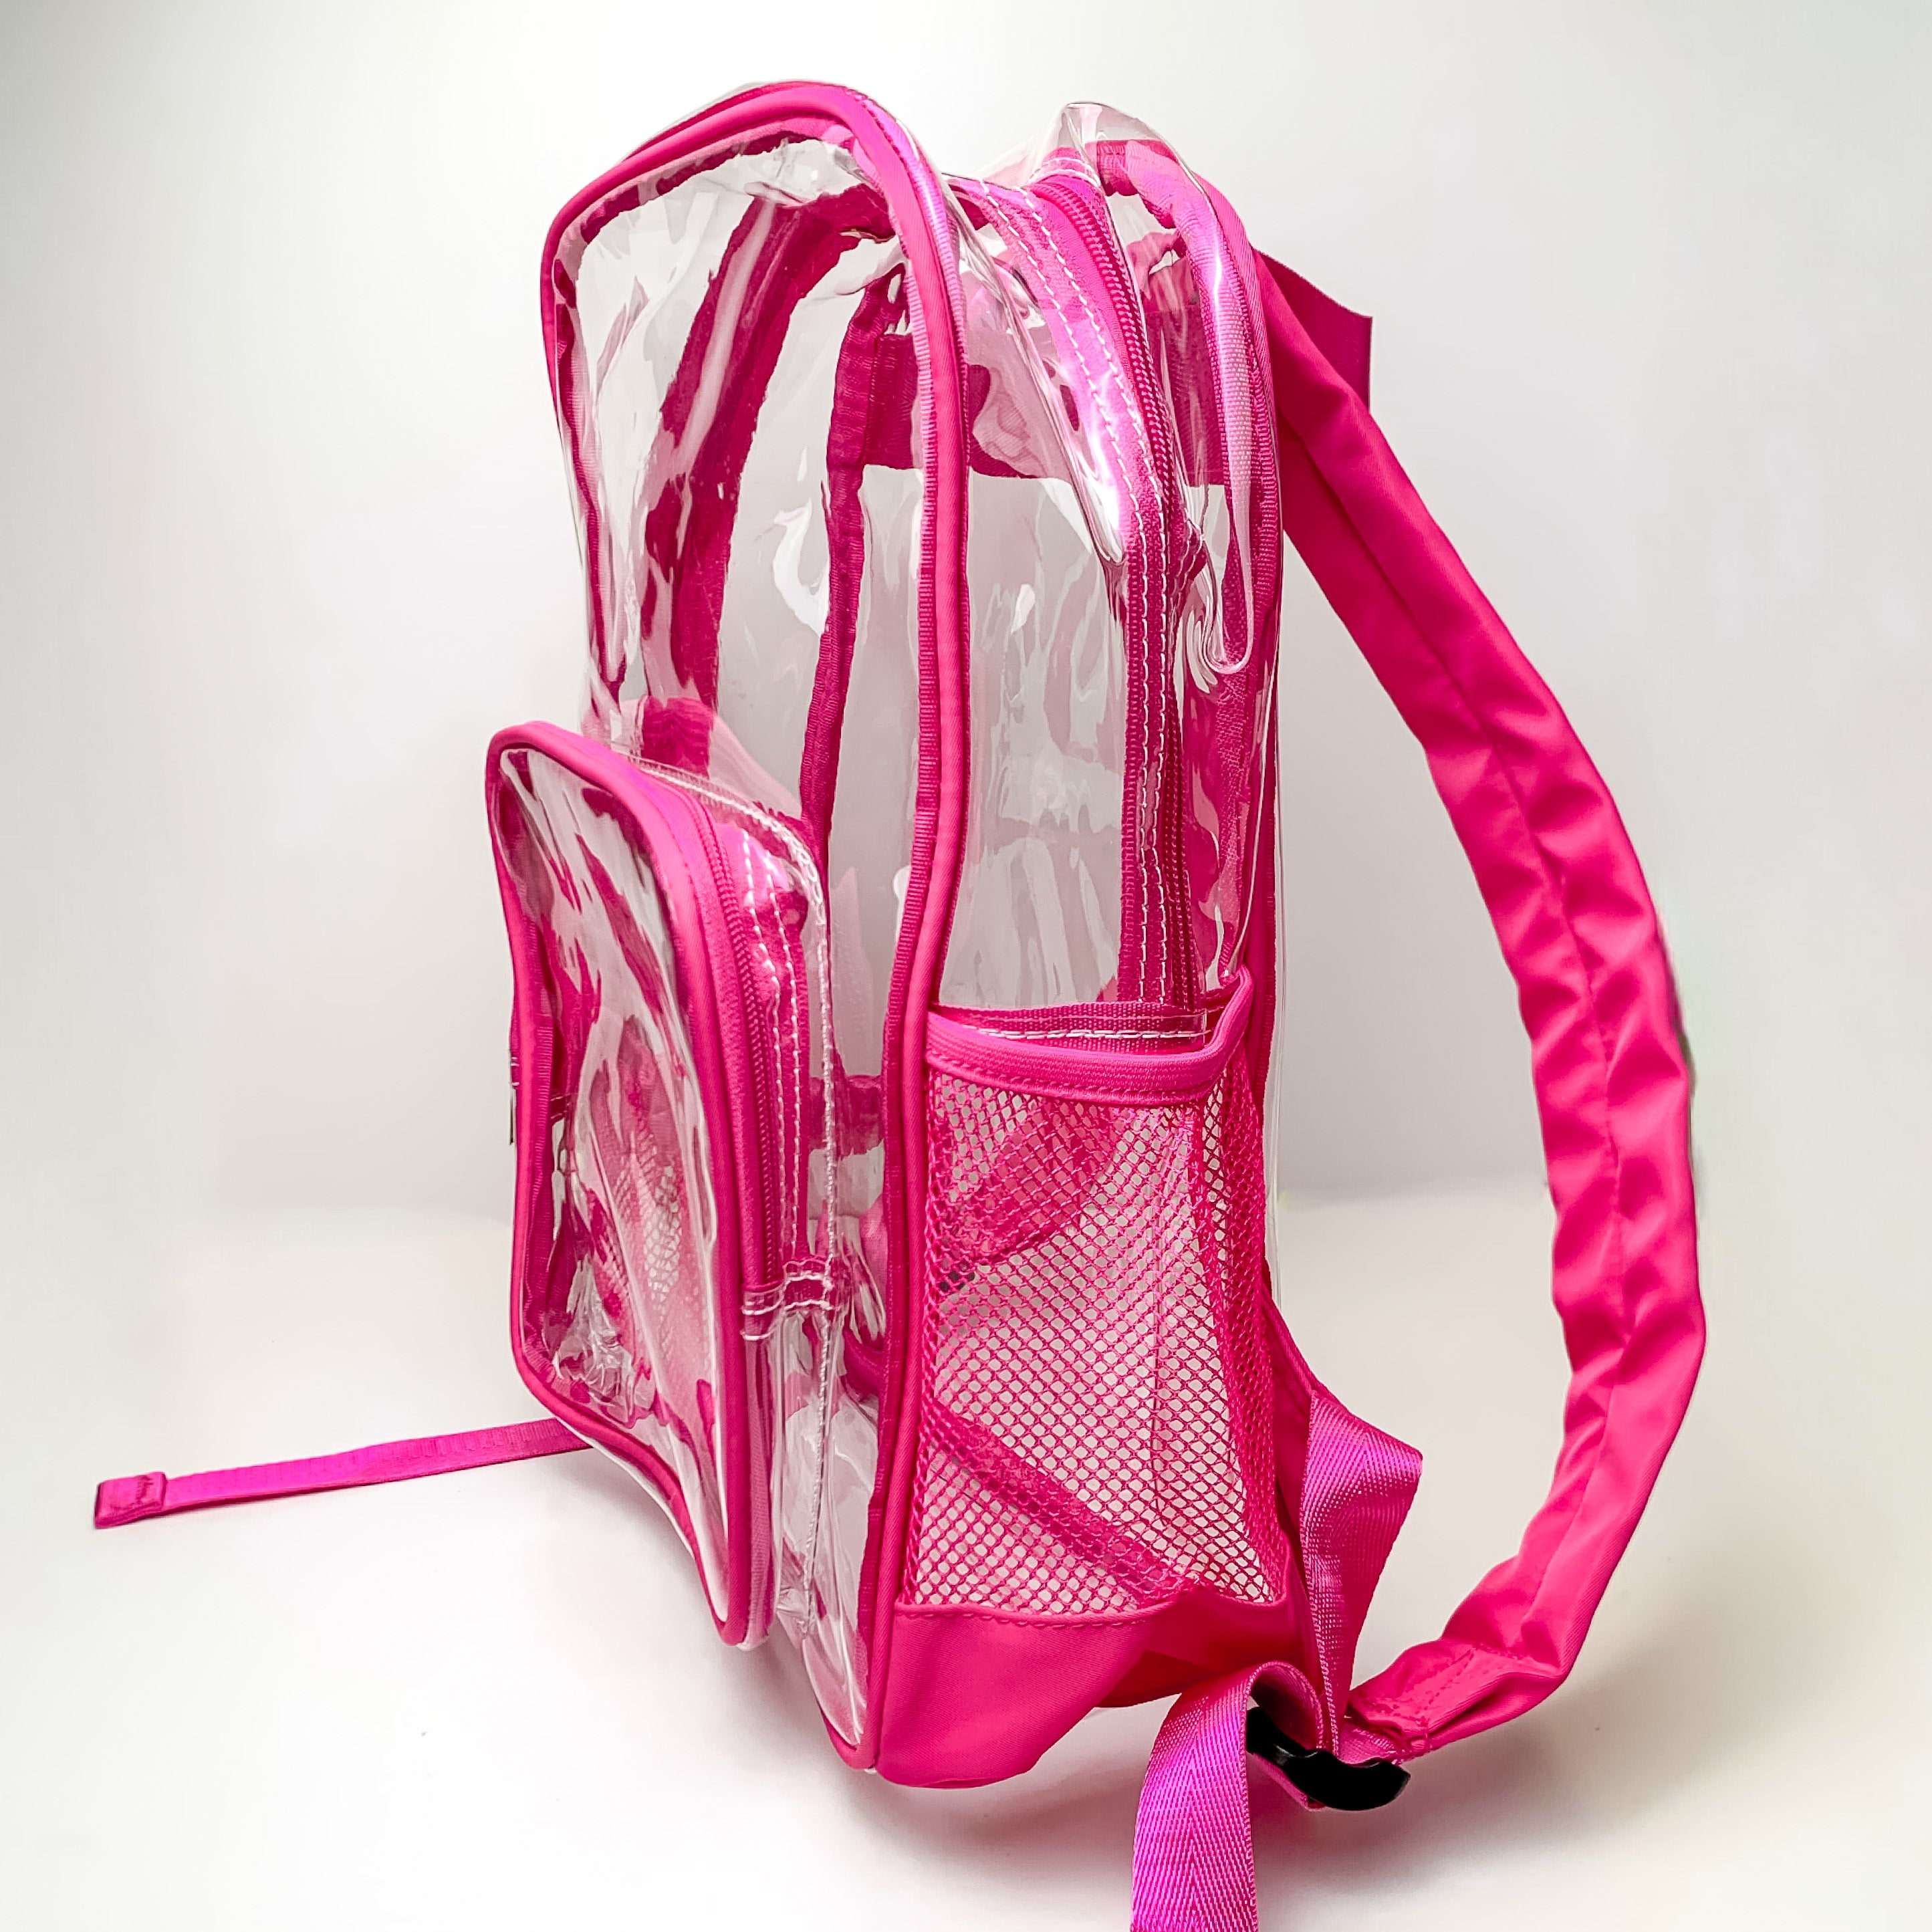 Clear Backpack in Fuchsia Pink - Giddy Up Glamour Boutique